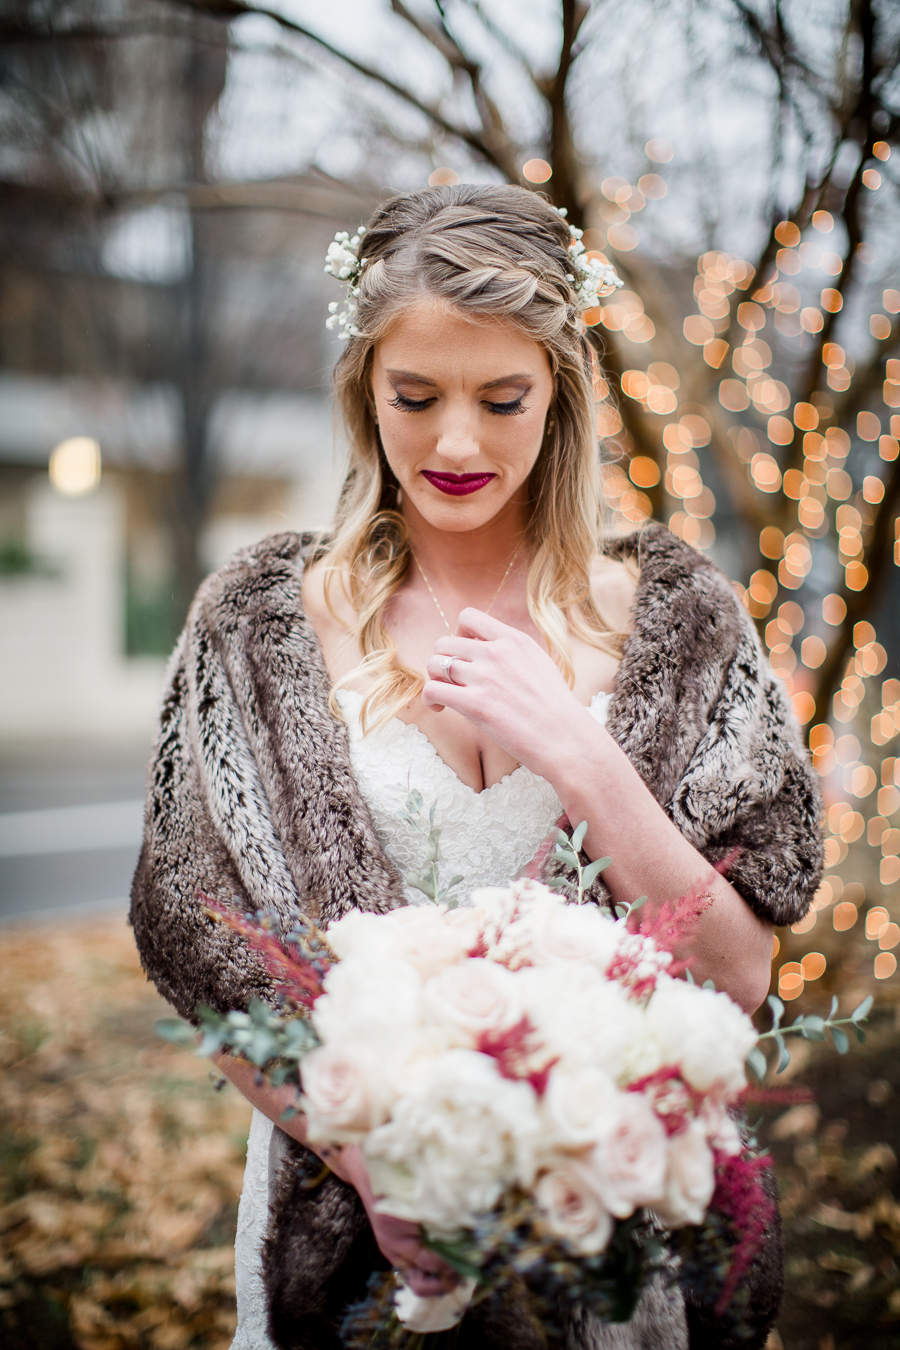 Holding onto a locket her parents gave her during the bride and bridesmaids pictures at this winter wedding at Knoxville Wedding Venue, Jackson Terminal, by Knoxville Wedding Photographer, Amanda May Photos.